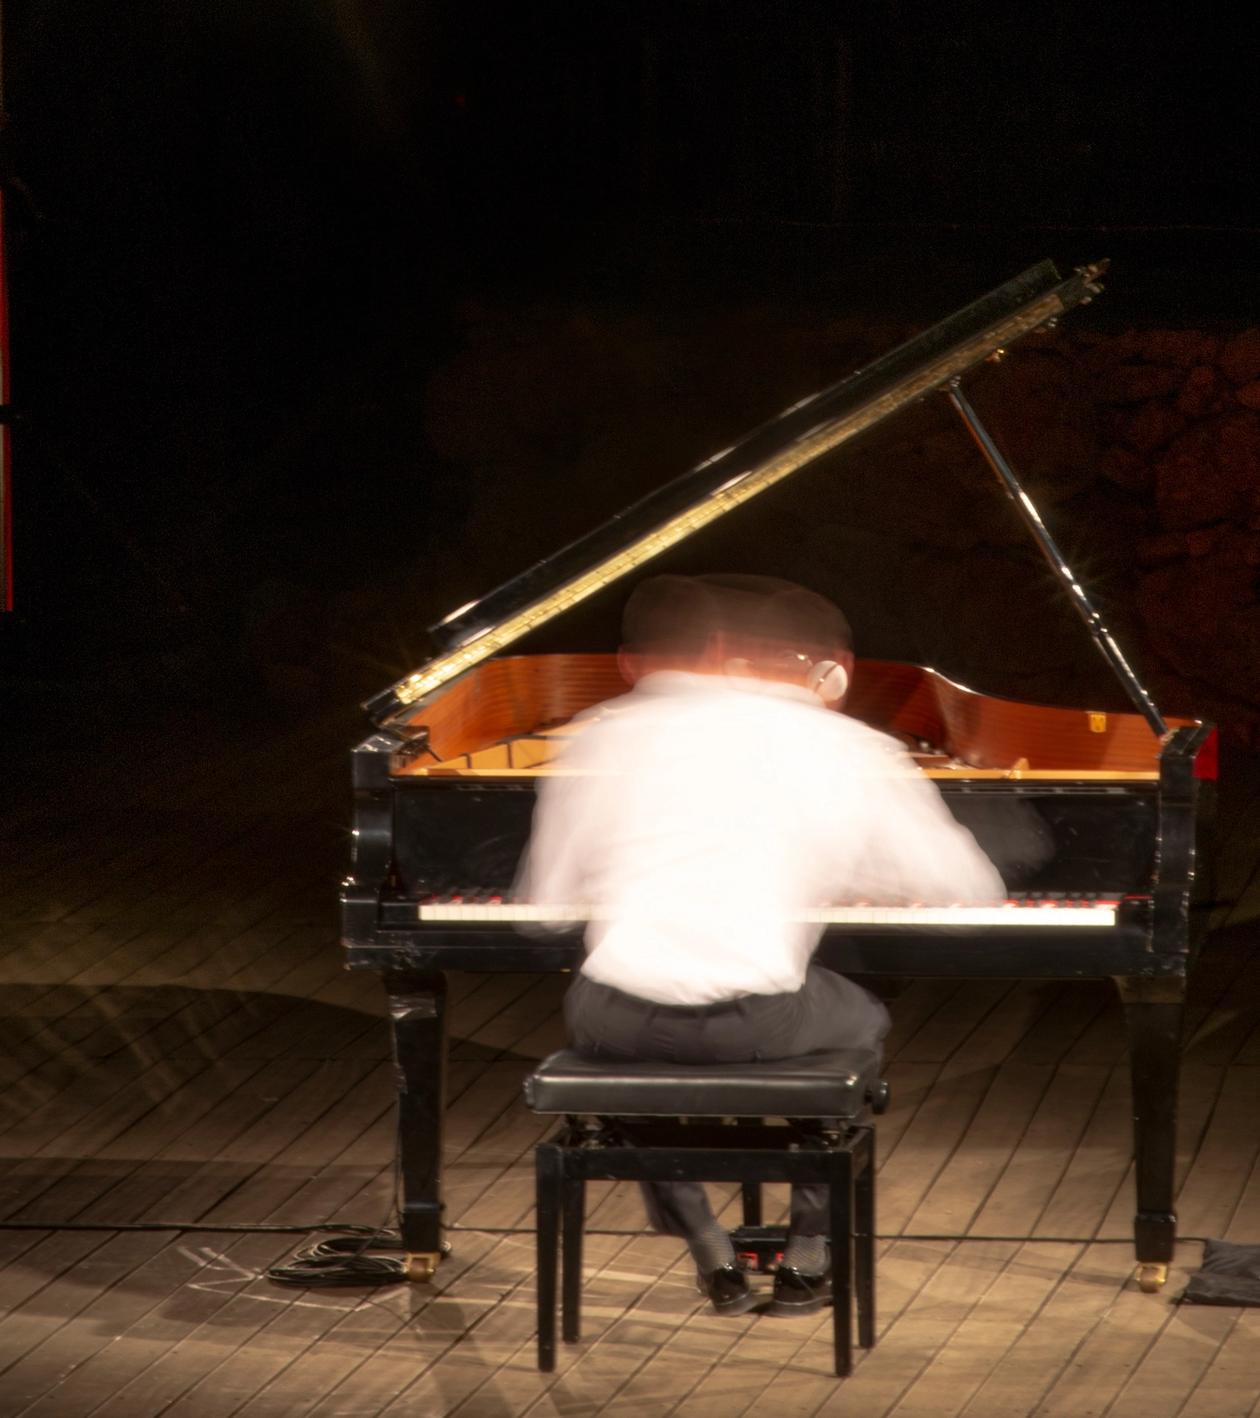 Picture of a piano player playing the piano on stage. He wear a white shirt and dark pants. The picture is taken with long exposure